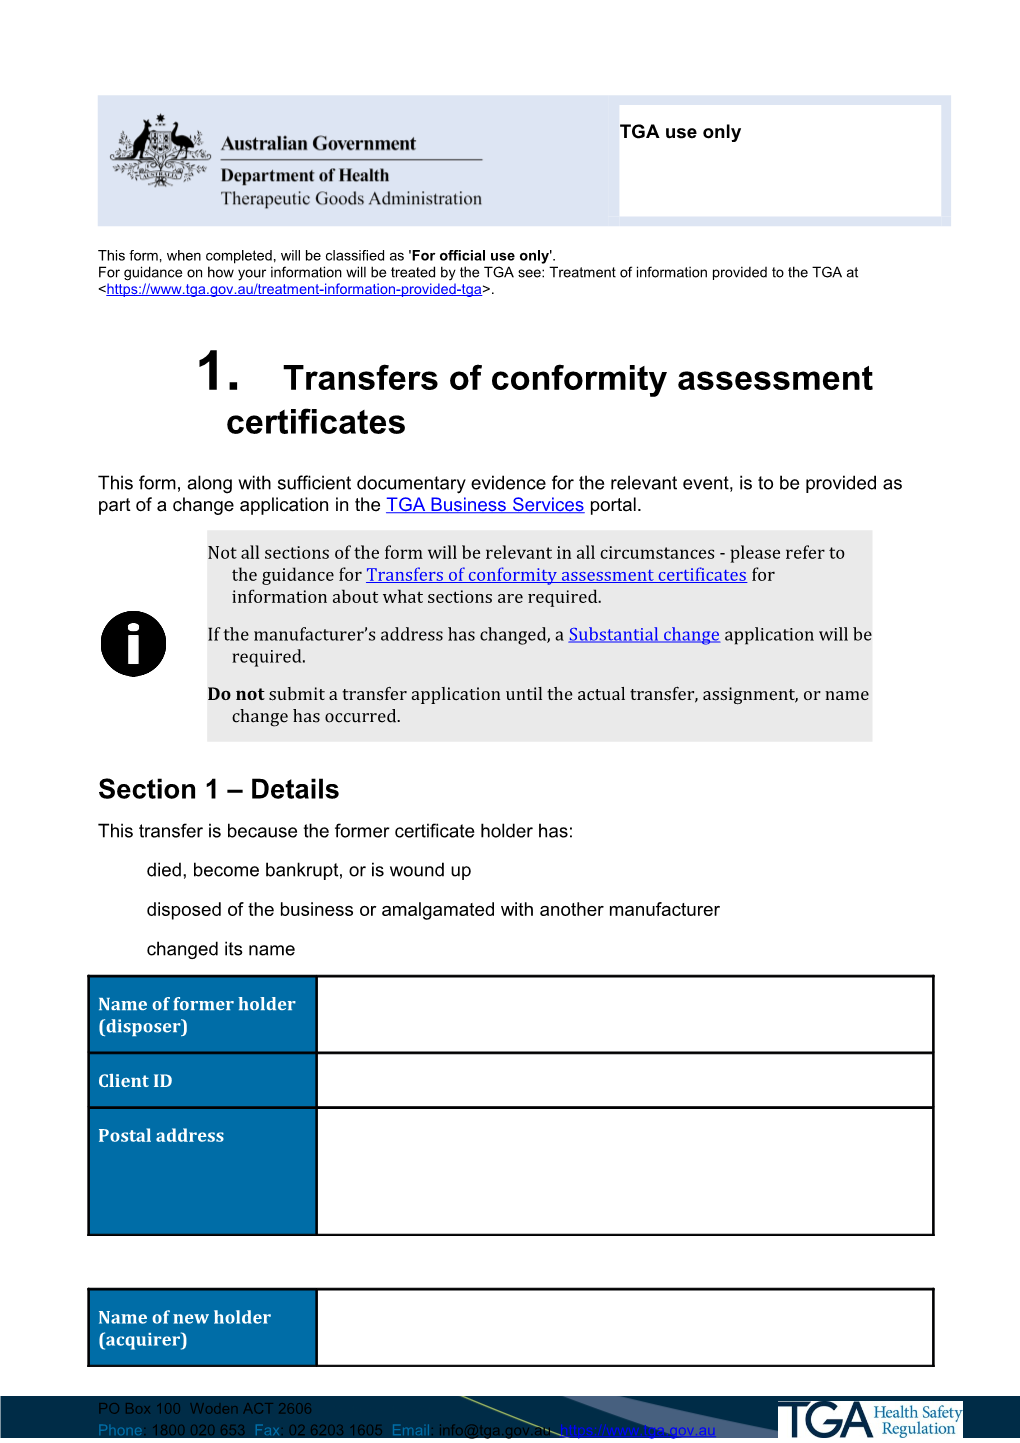 Transfers of Conformity Assessment Certificates